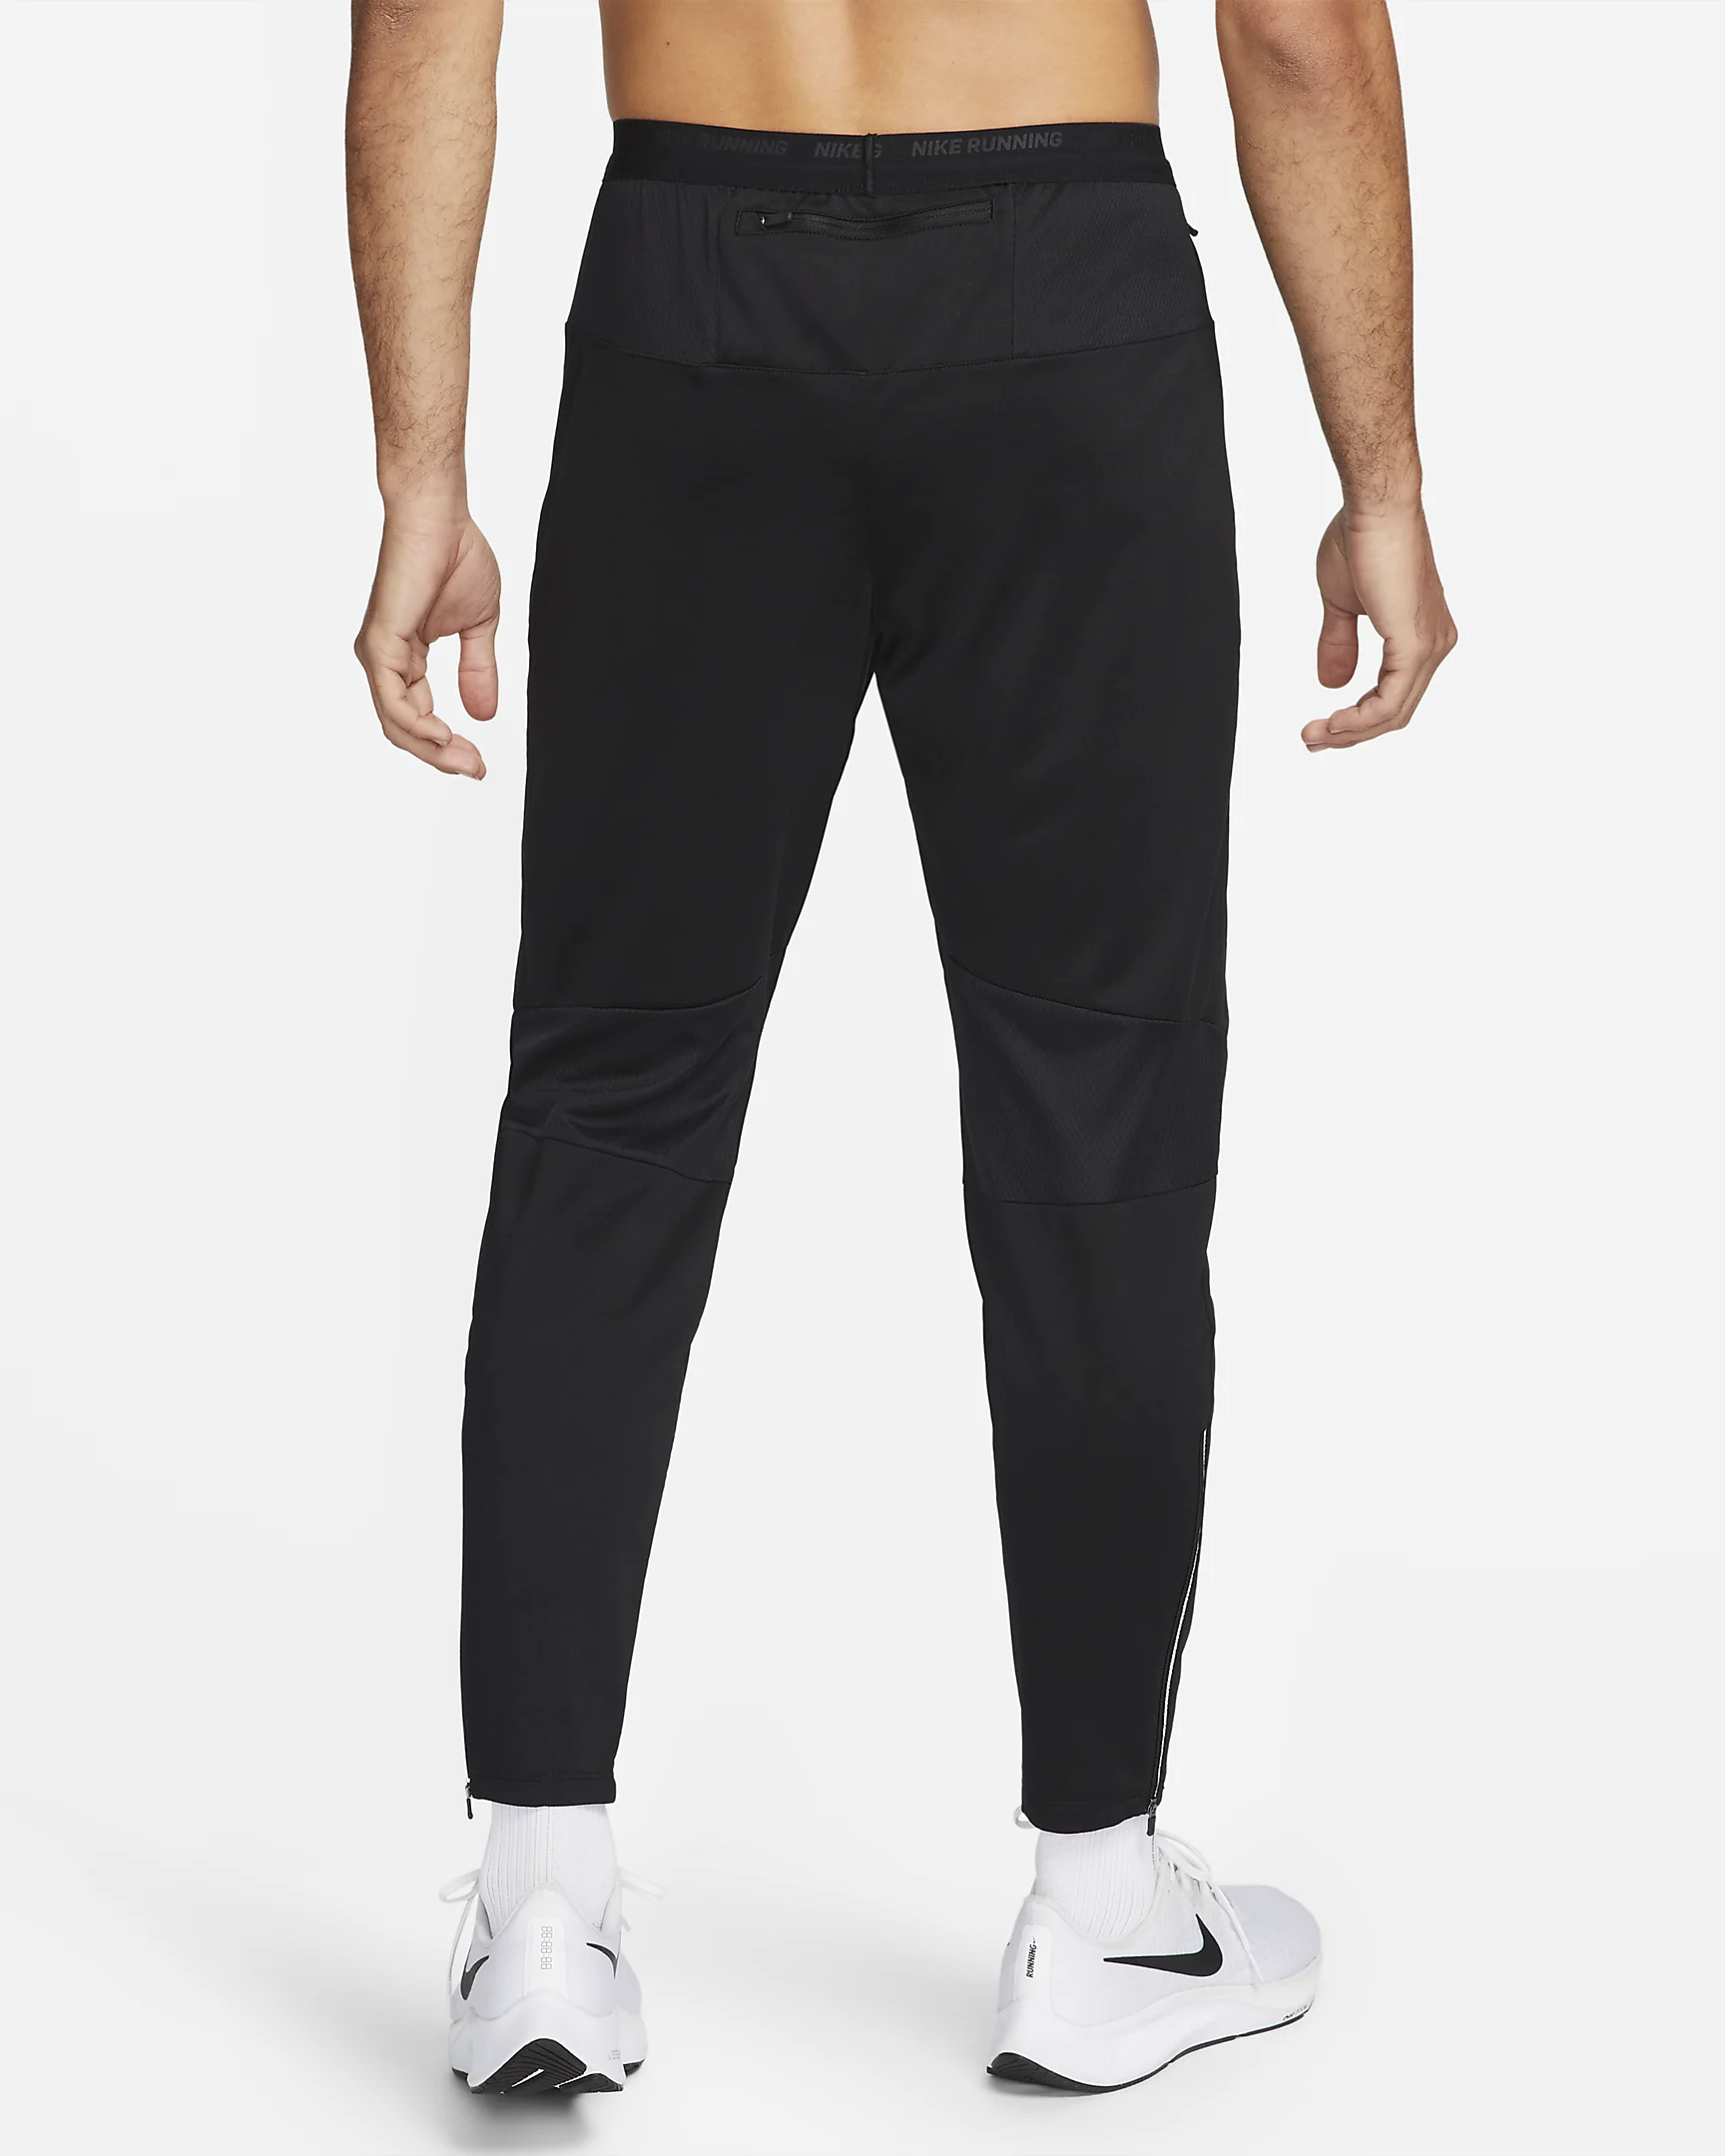 MEN'S PHENOM ELITE KNIT PANT  Performance Running Outfitters